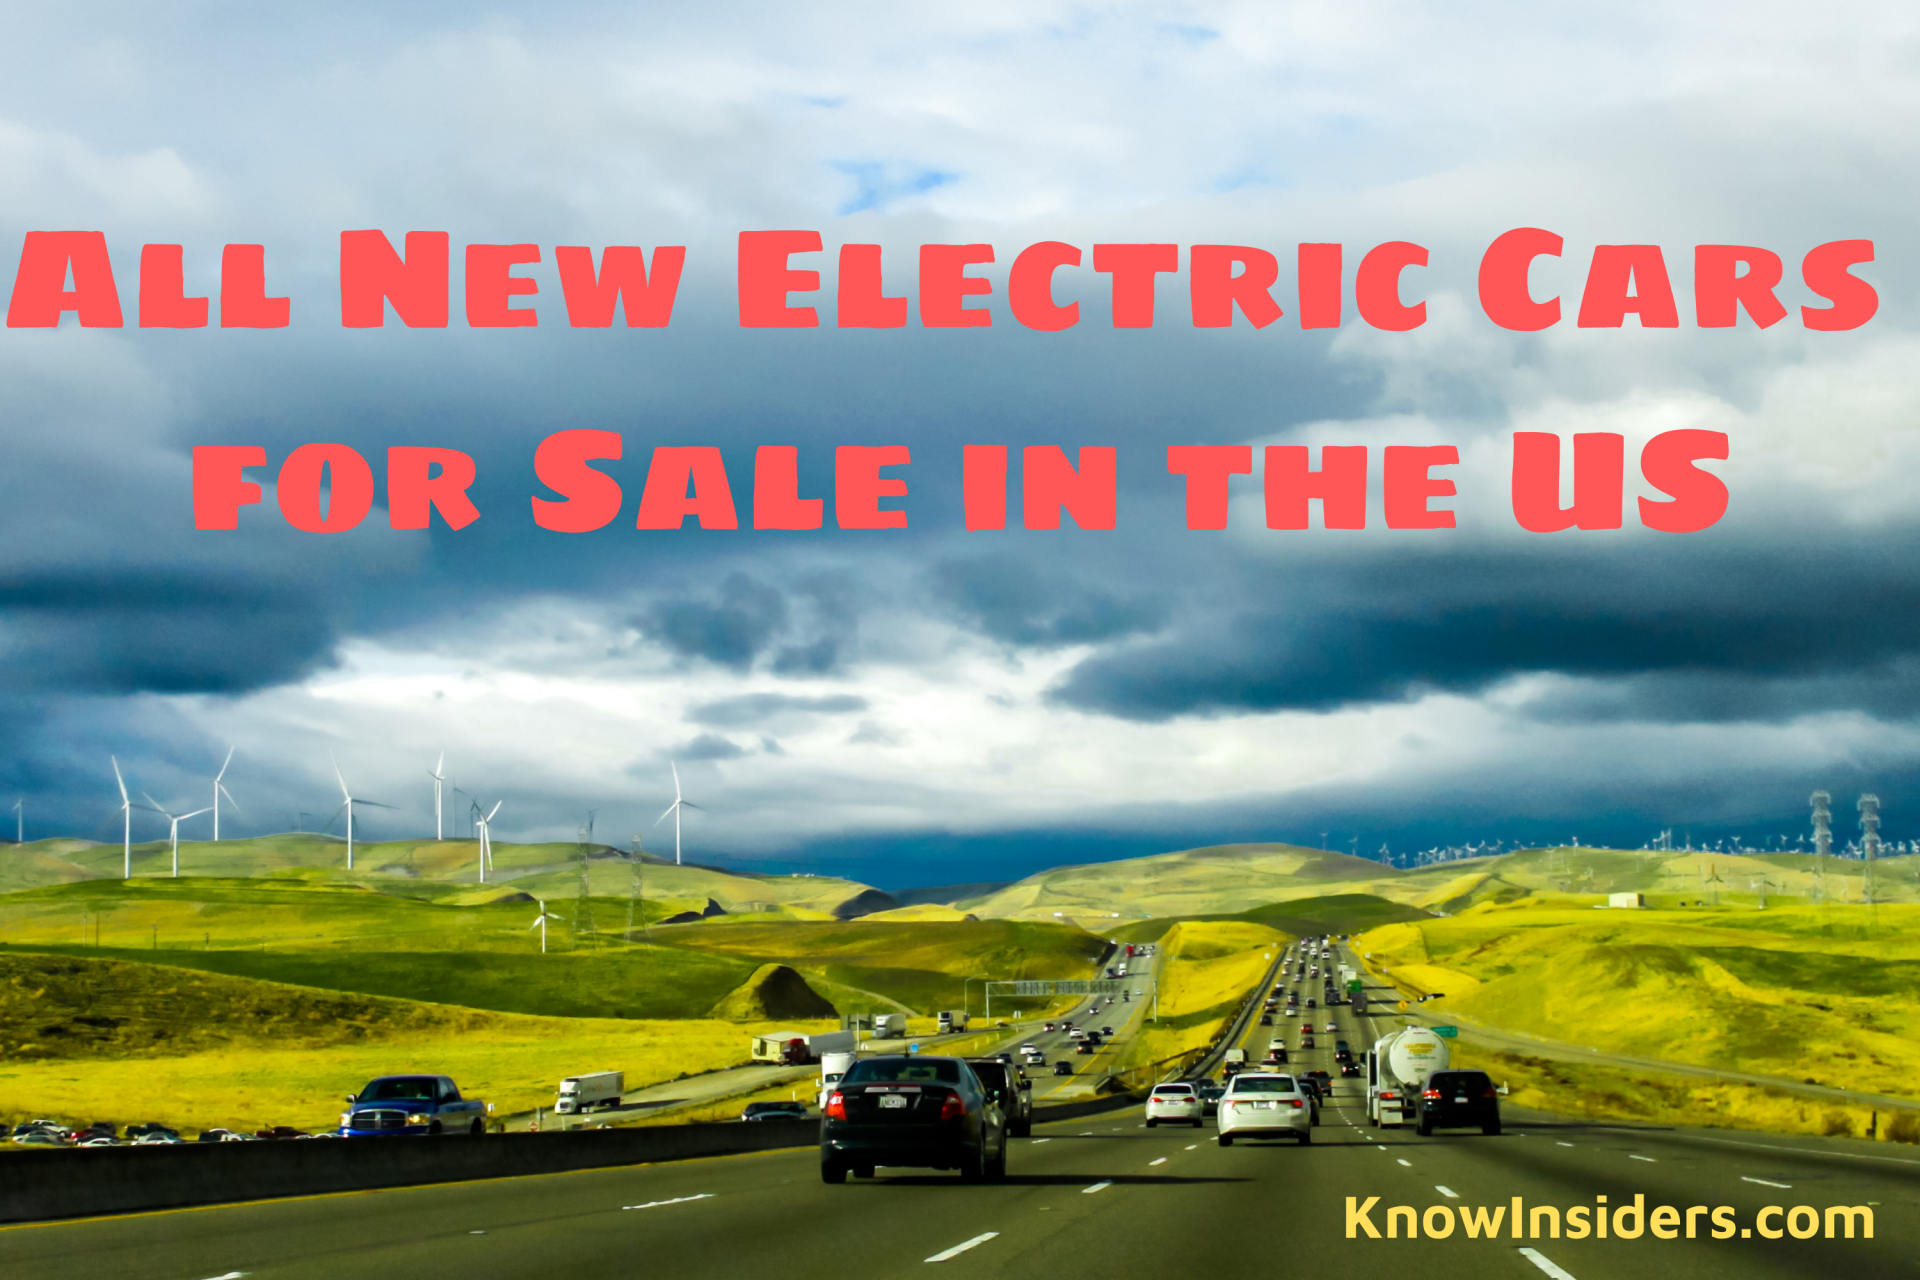 Prices of New Electric Cars for Sale in the US